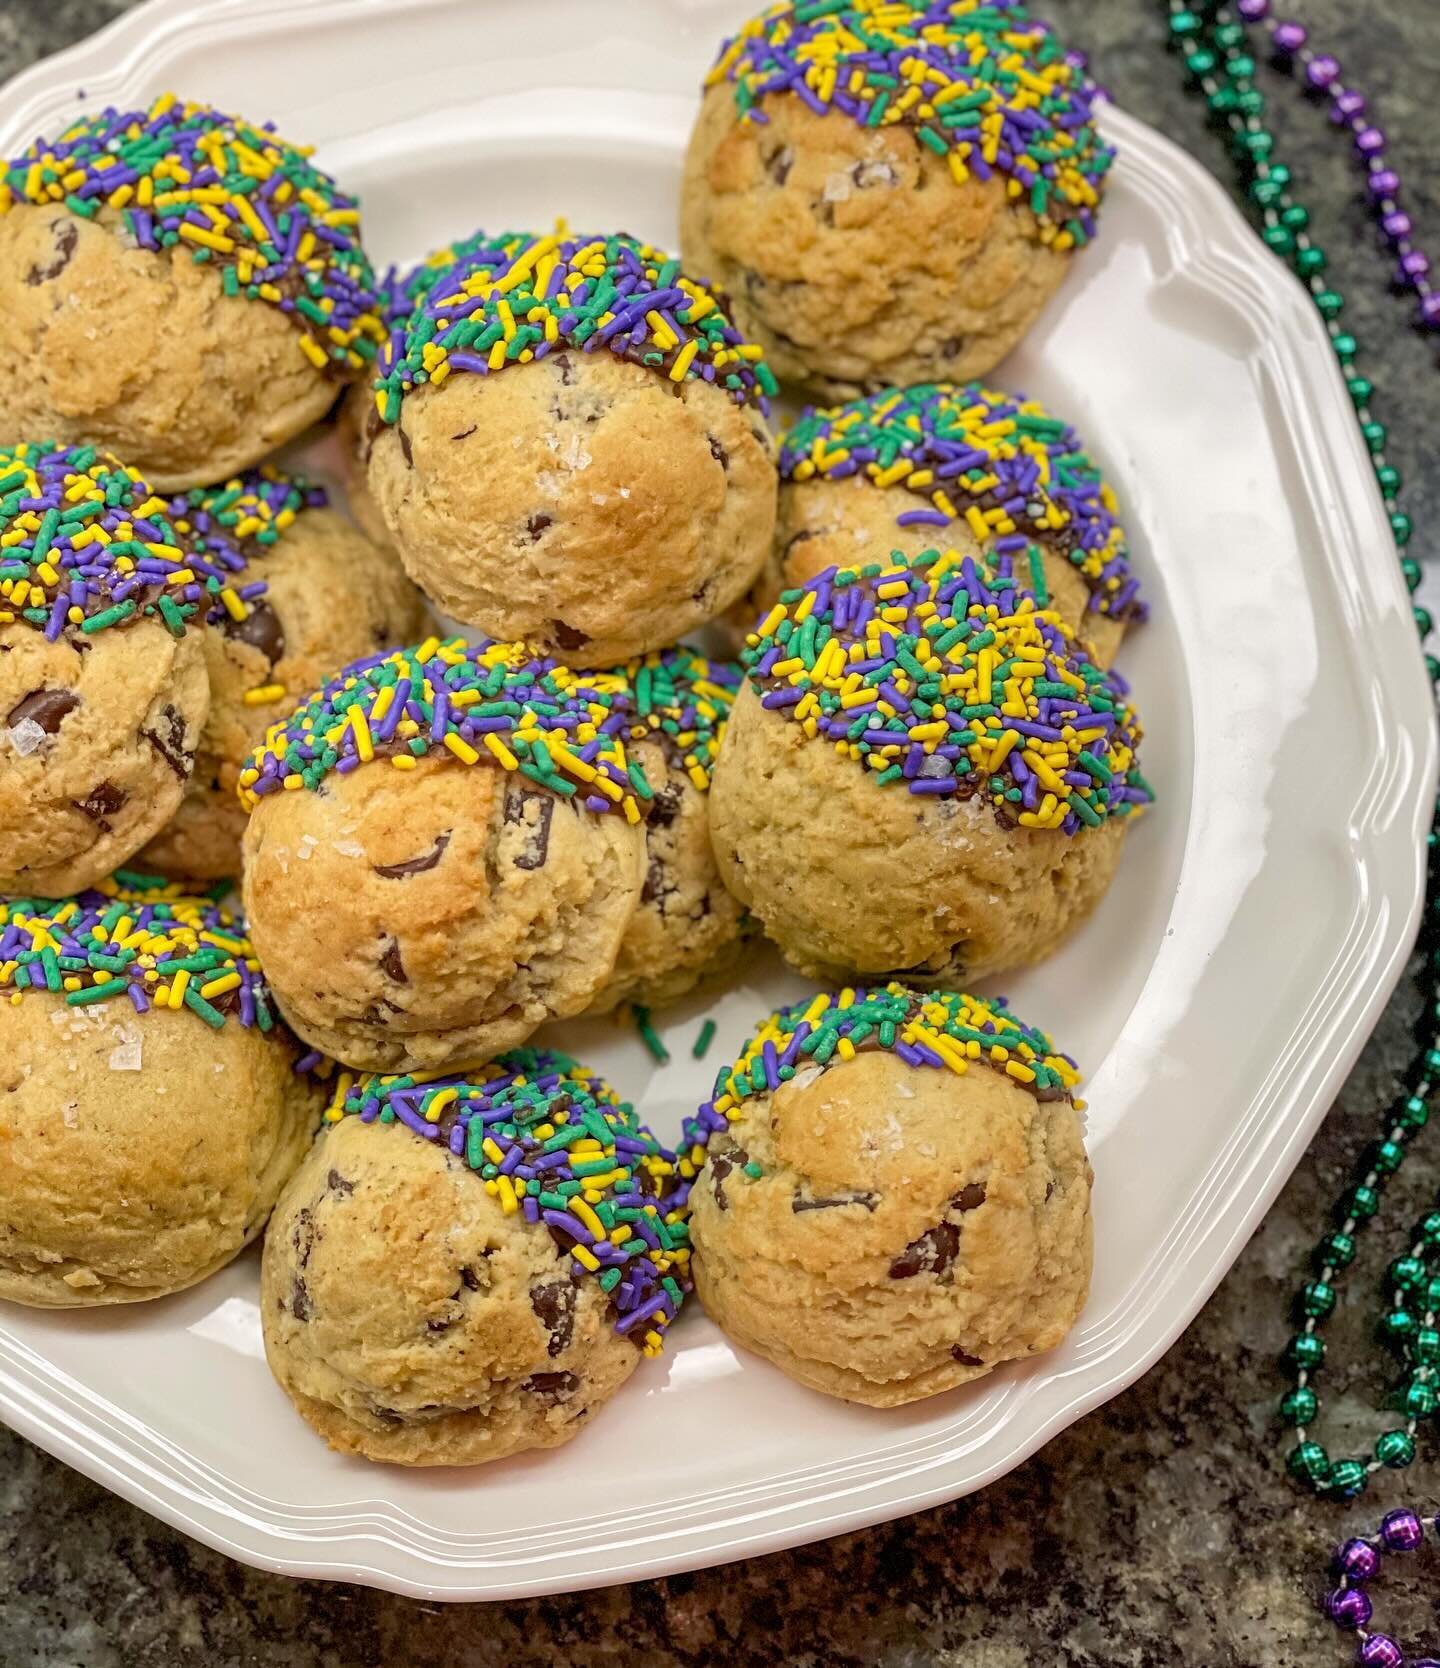 Let the good times roll! Happy Mardi Gras! 

#mykindofcookies #atlanta #atlantacookies #atlantacookier #cookier #cookies #chocolatechipcookies #decoratedcookies #cottagefood #cottagefoodbaker #instabaker #localbaker #instacookies #smallbusiness #smal